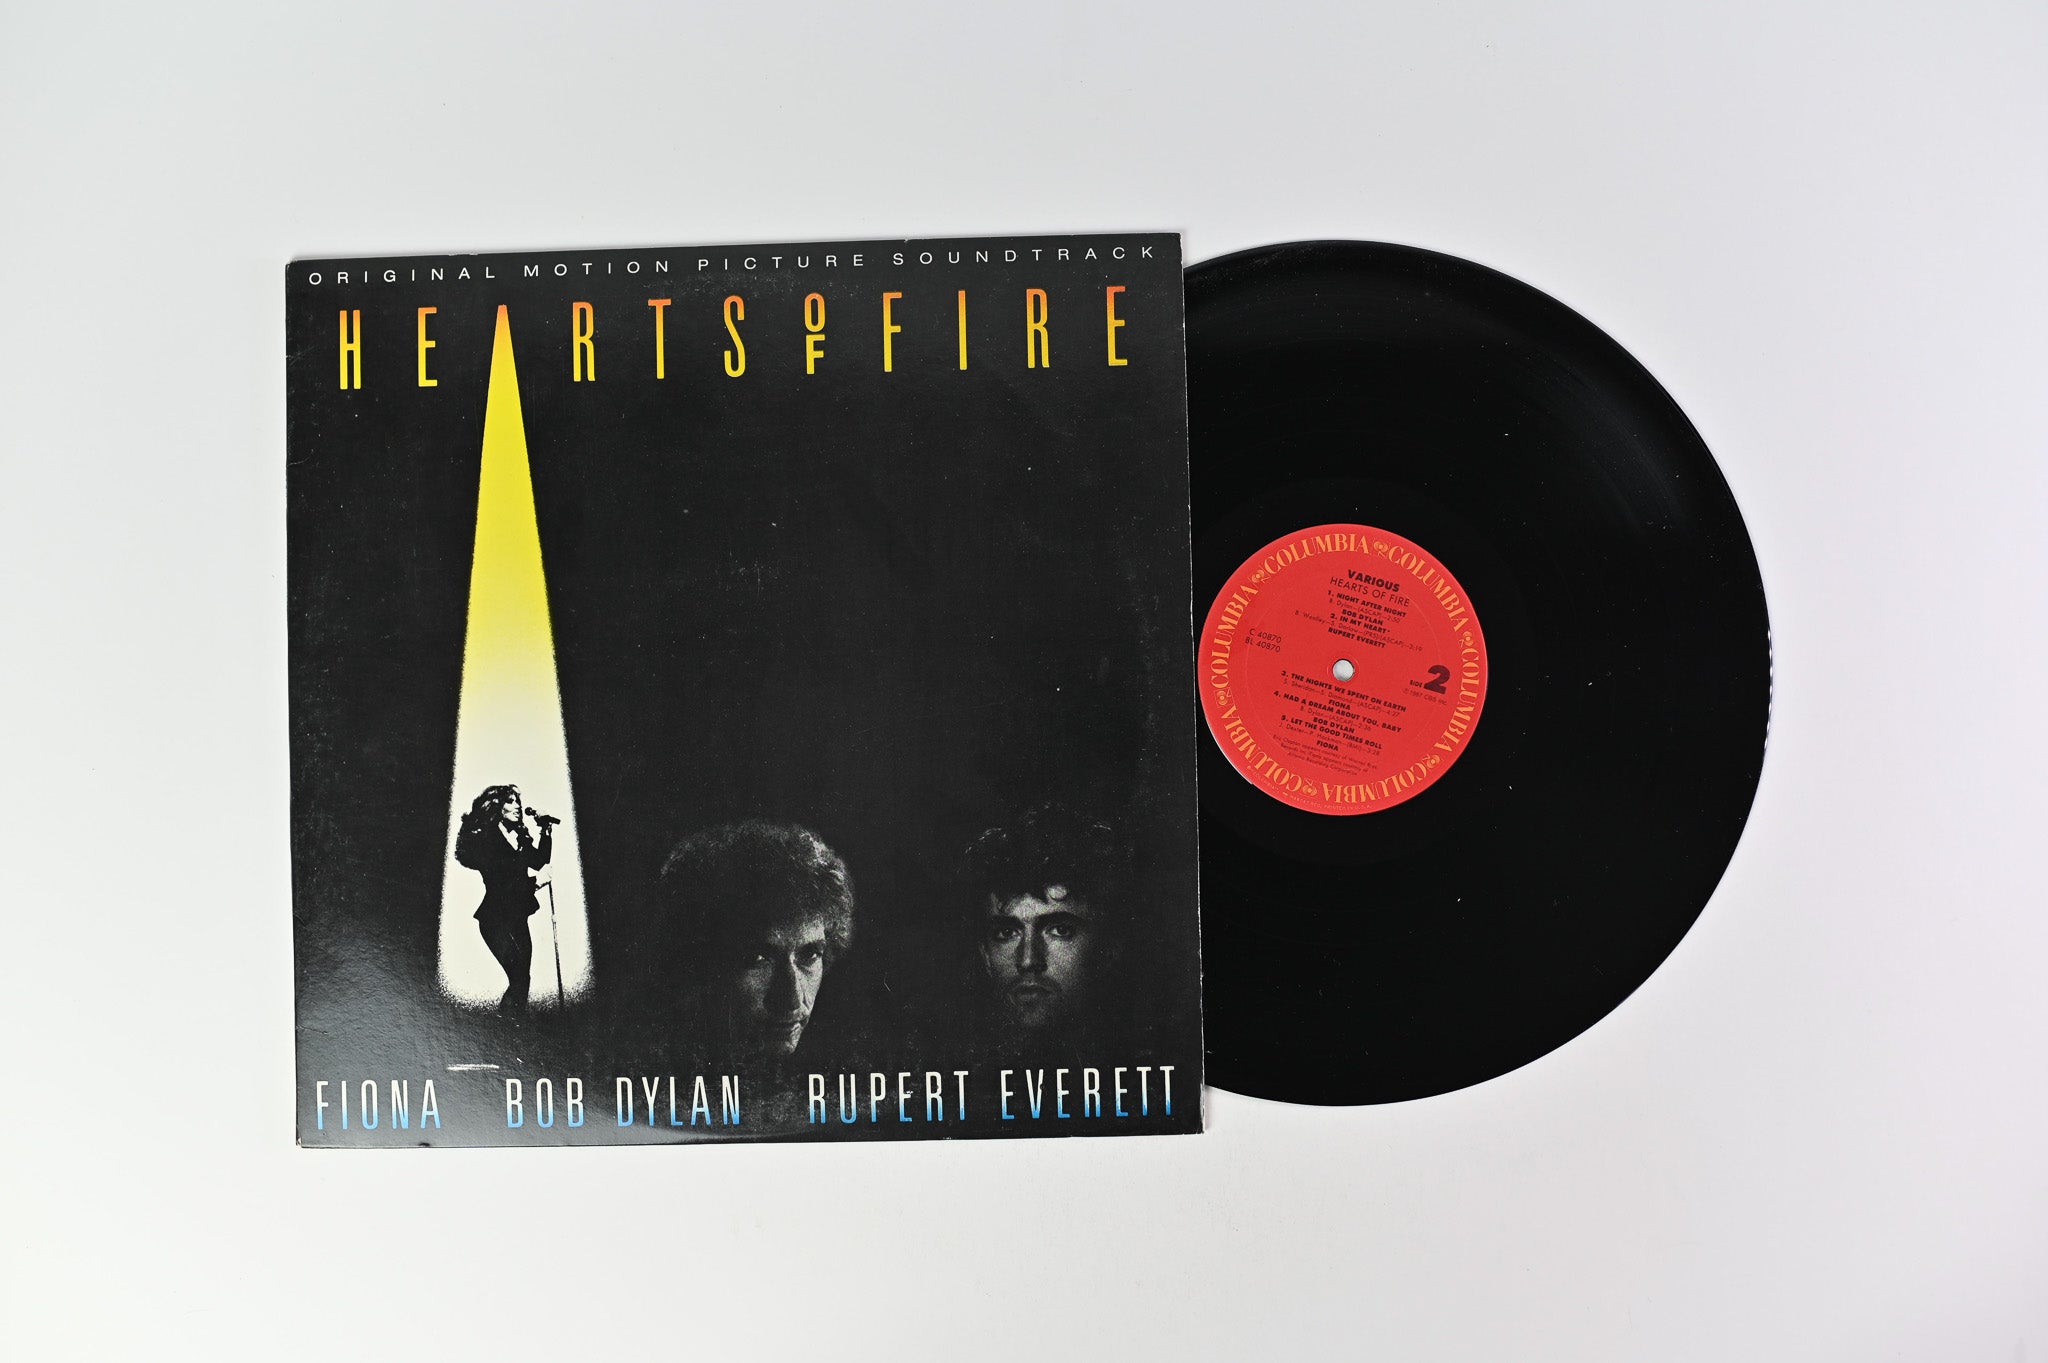 Various - Hearts Of Fire (Original Motion Picture Soundtrack) on Columbia